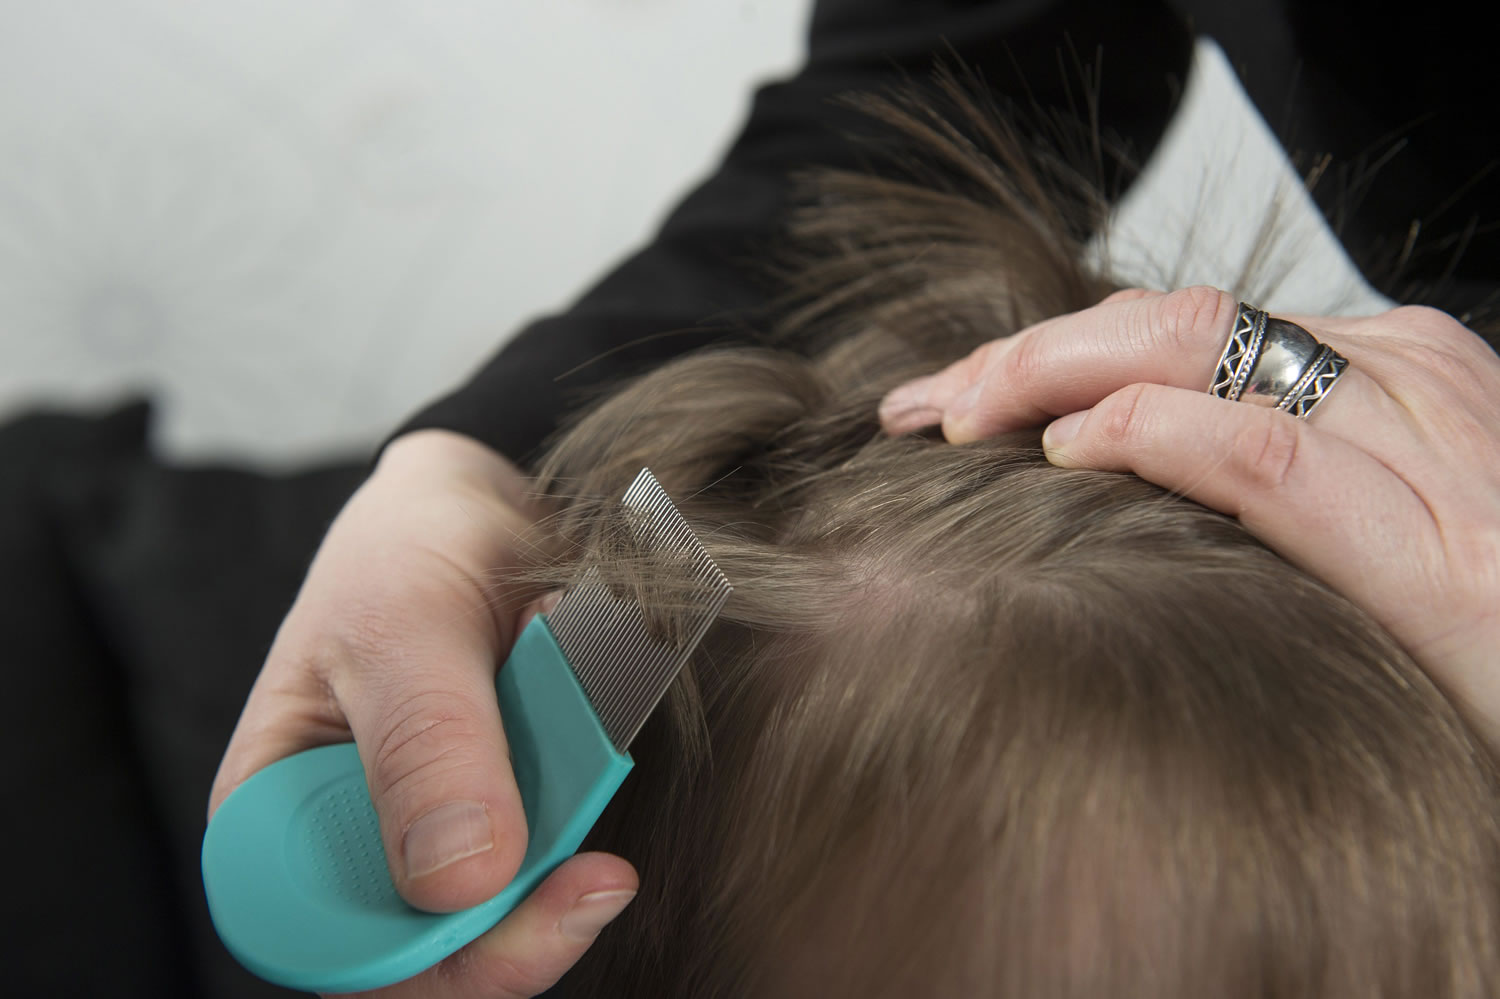 A new strain of &quot;super lice&quot; has infested people in 25 states, but they are still treatable.